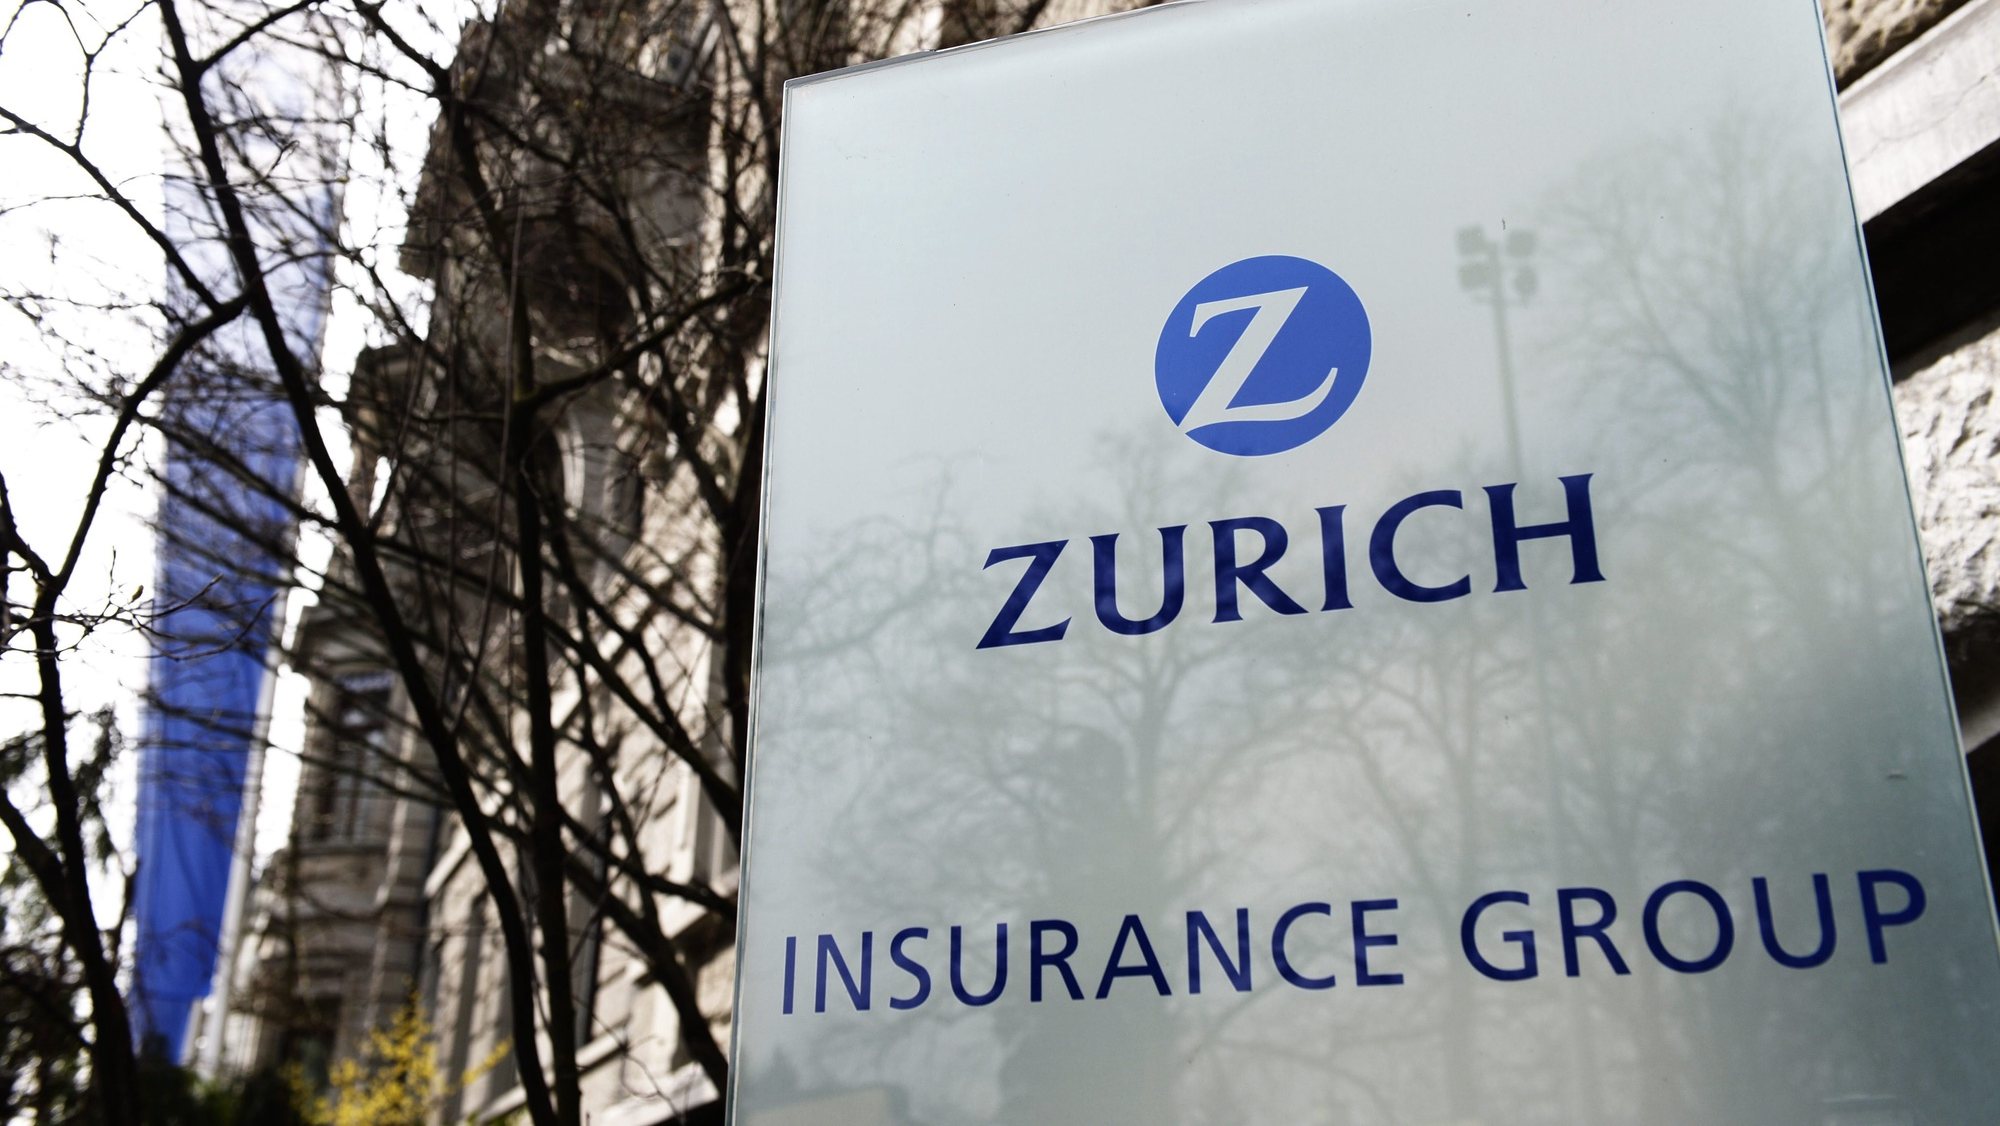 epa04120105 The Logo of Zurich Insurance Group, pictured 11 March 2014 in Zurich, Switzerland. The Swiss Insurance company Zurich today announced plans to cut about 800 jobs globally by the end of 2015.  EPA/STEFFEN SCHMIDT